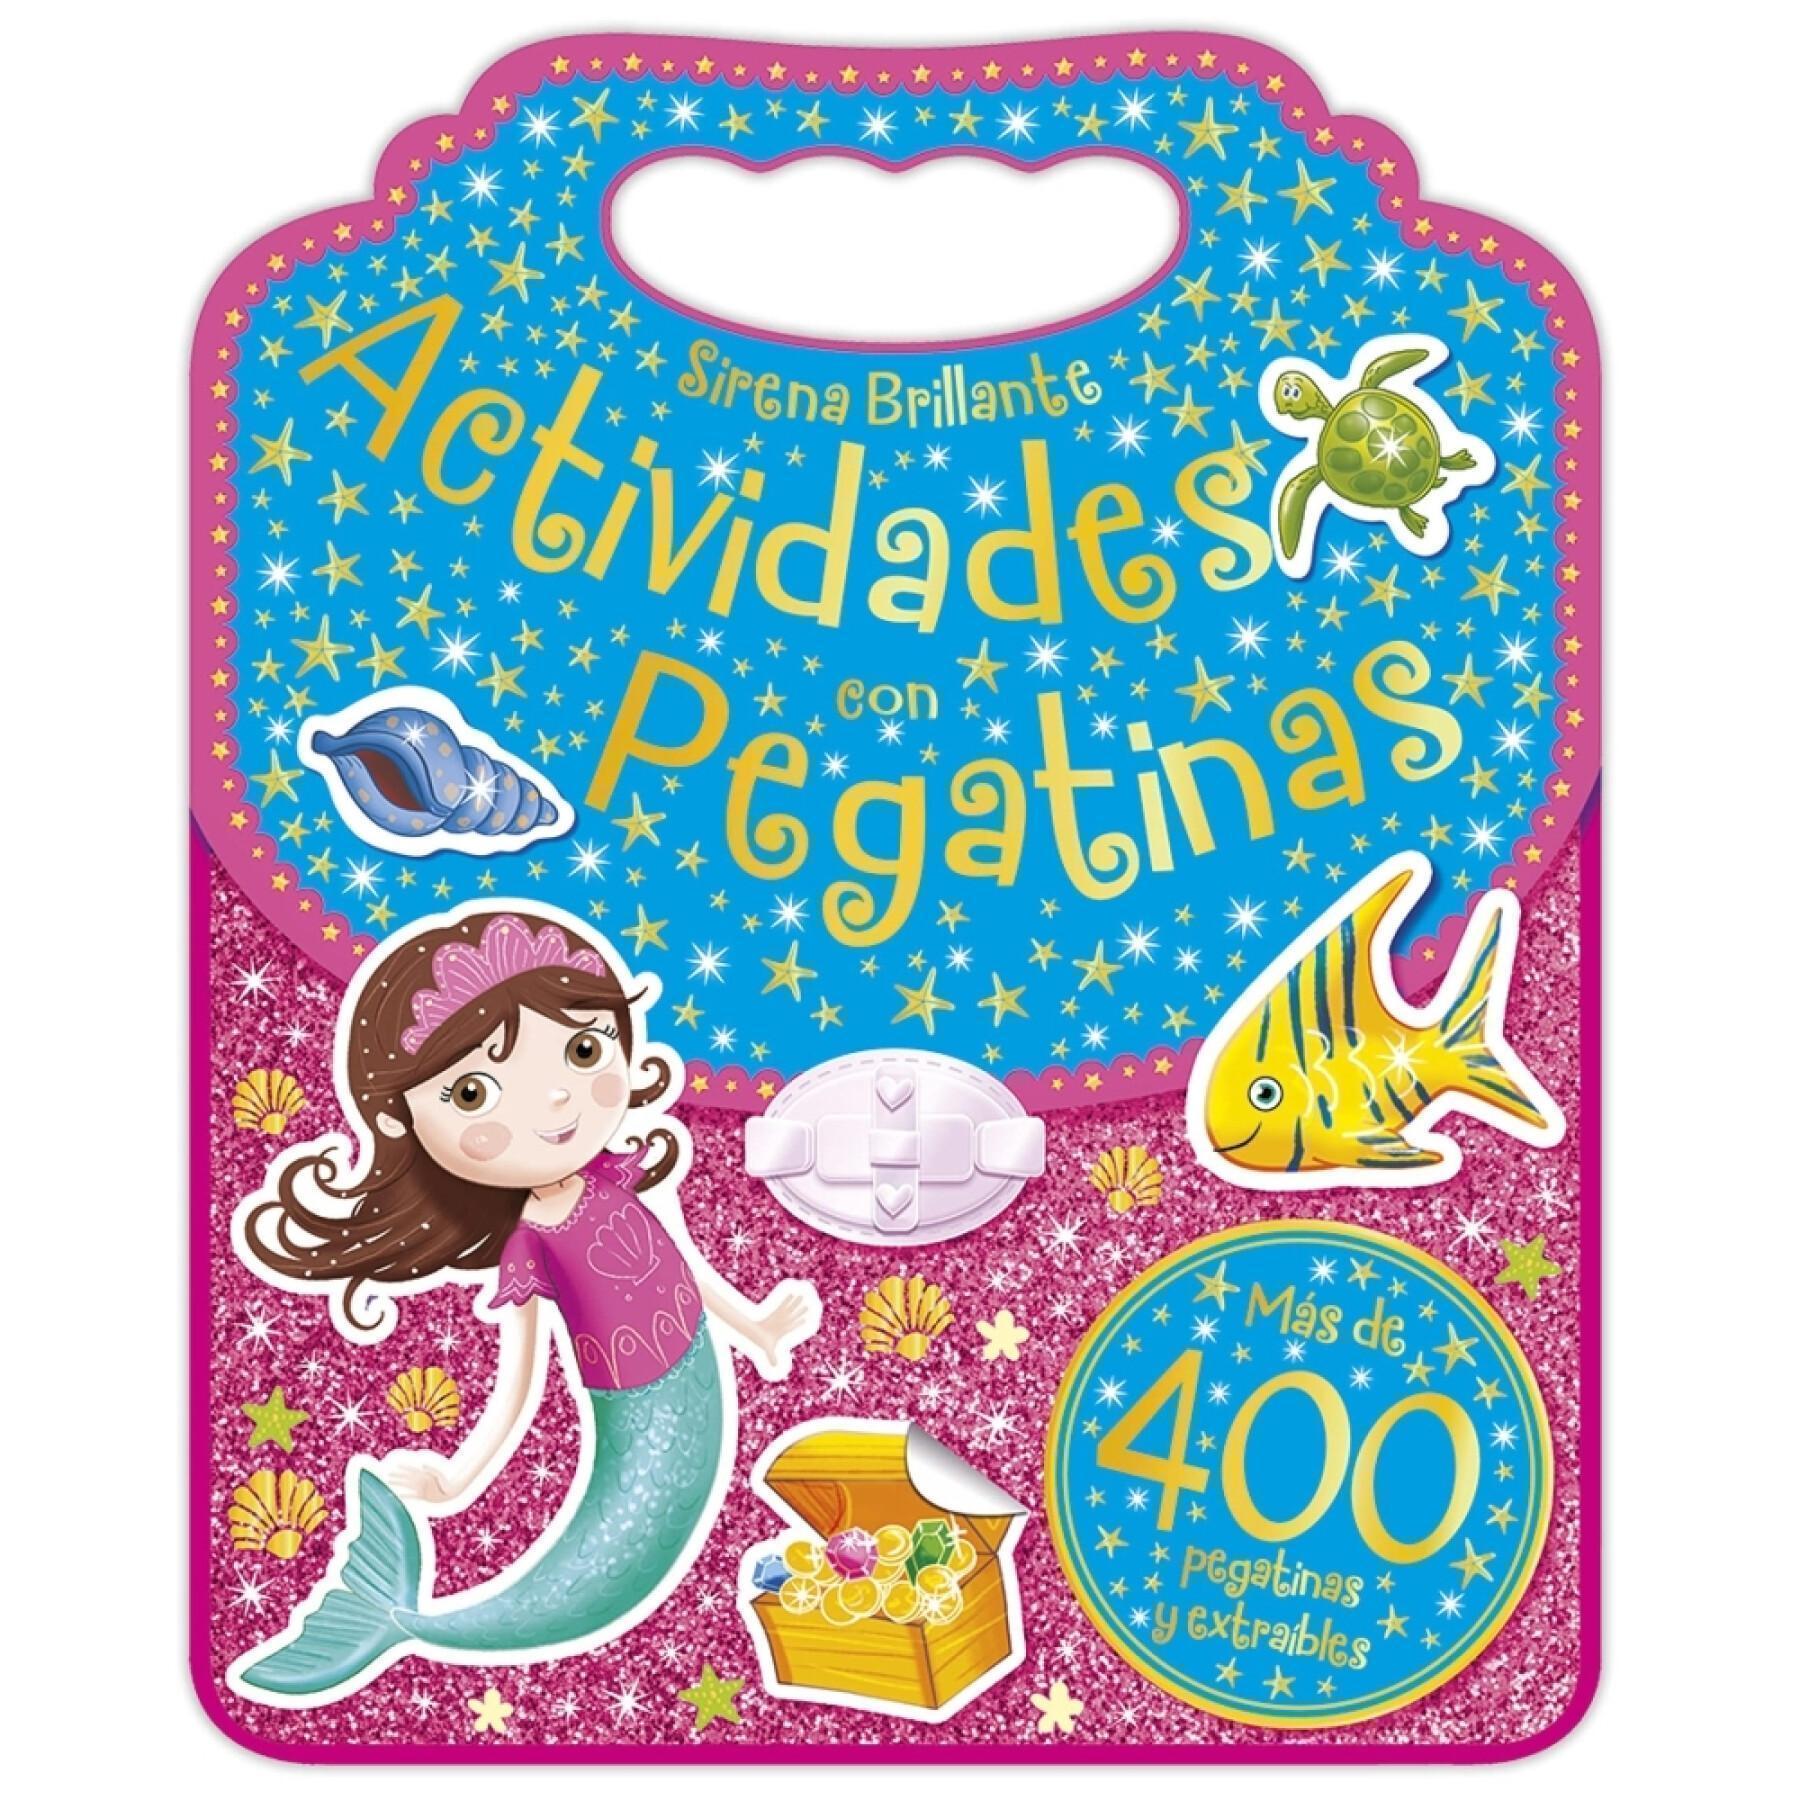 Removable book and glittery mermaid stickers Edibook